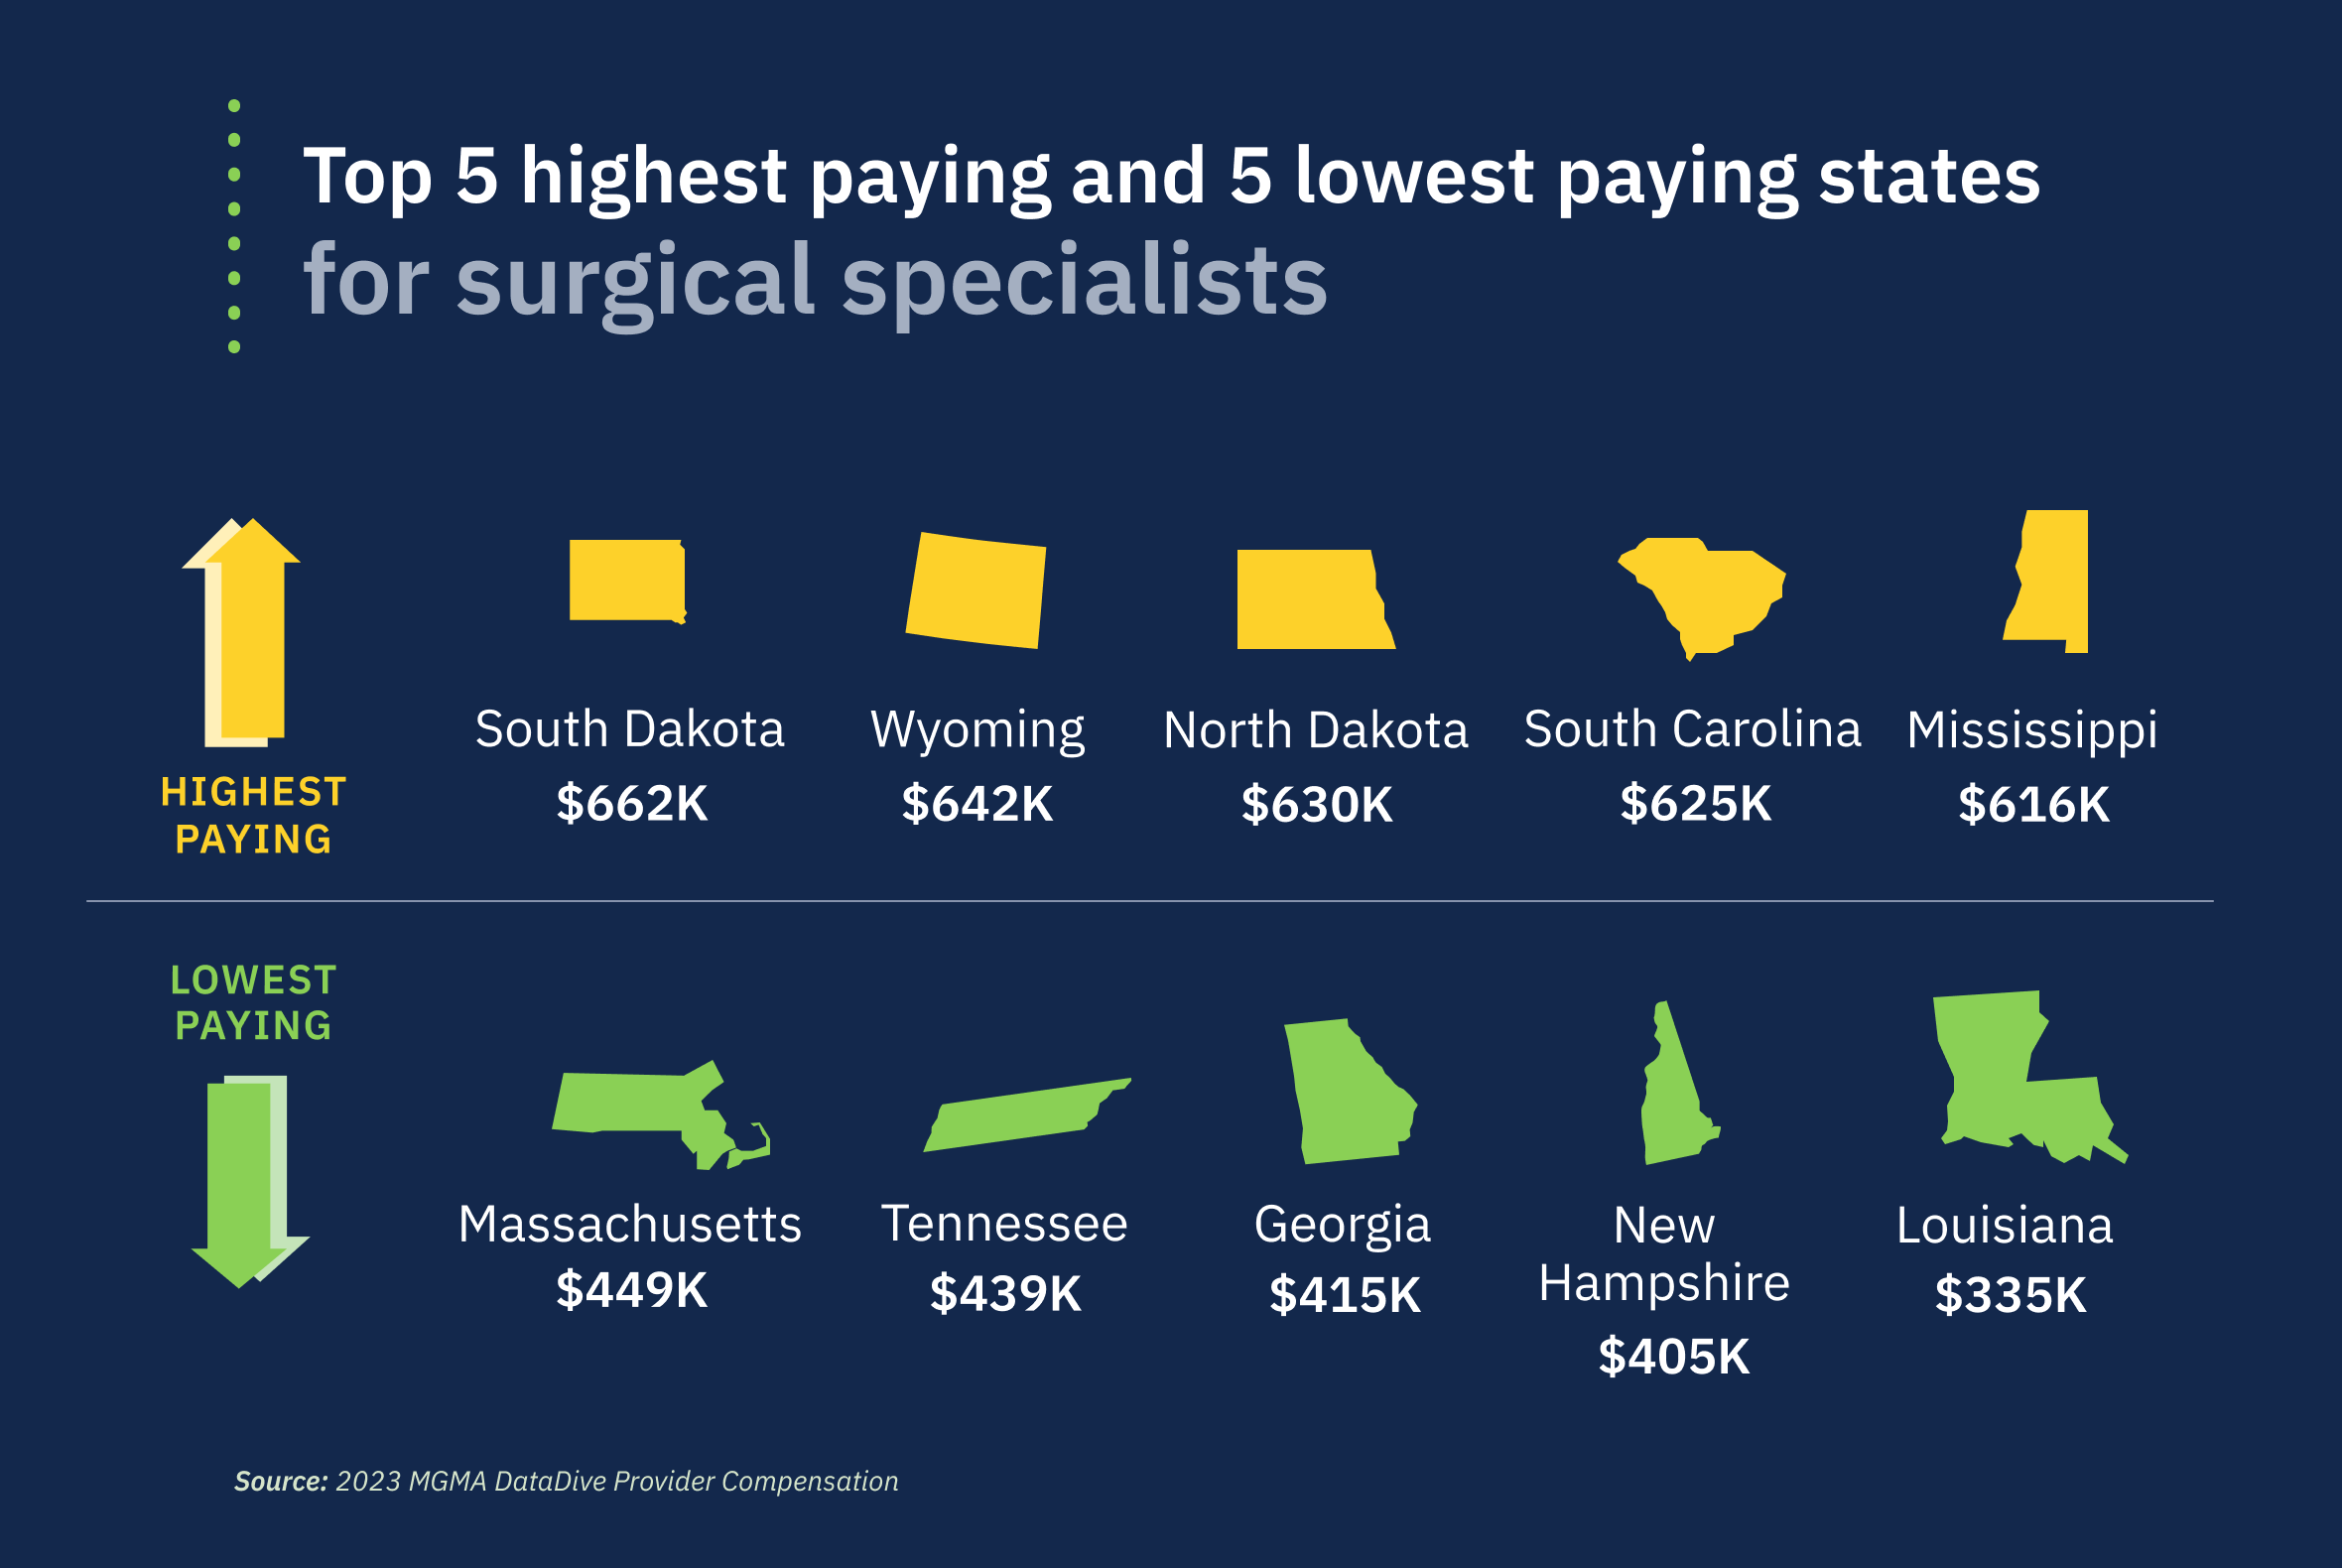 Map 2: 5 highest and lowest paying states for surgical specialists